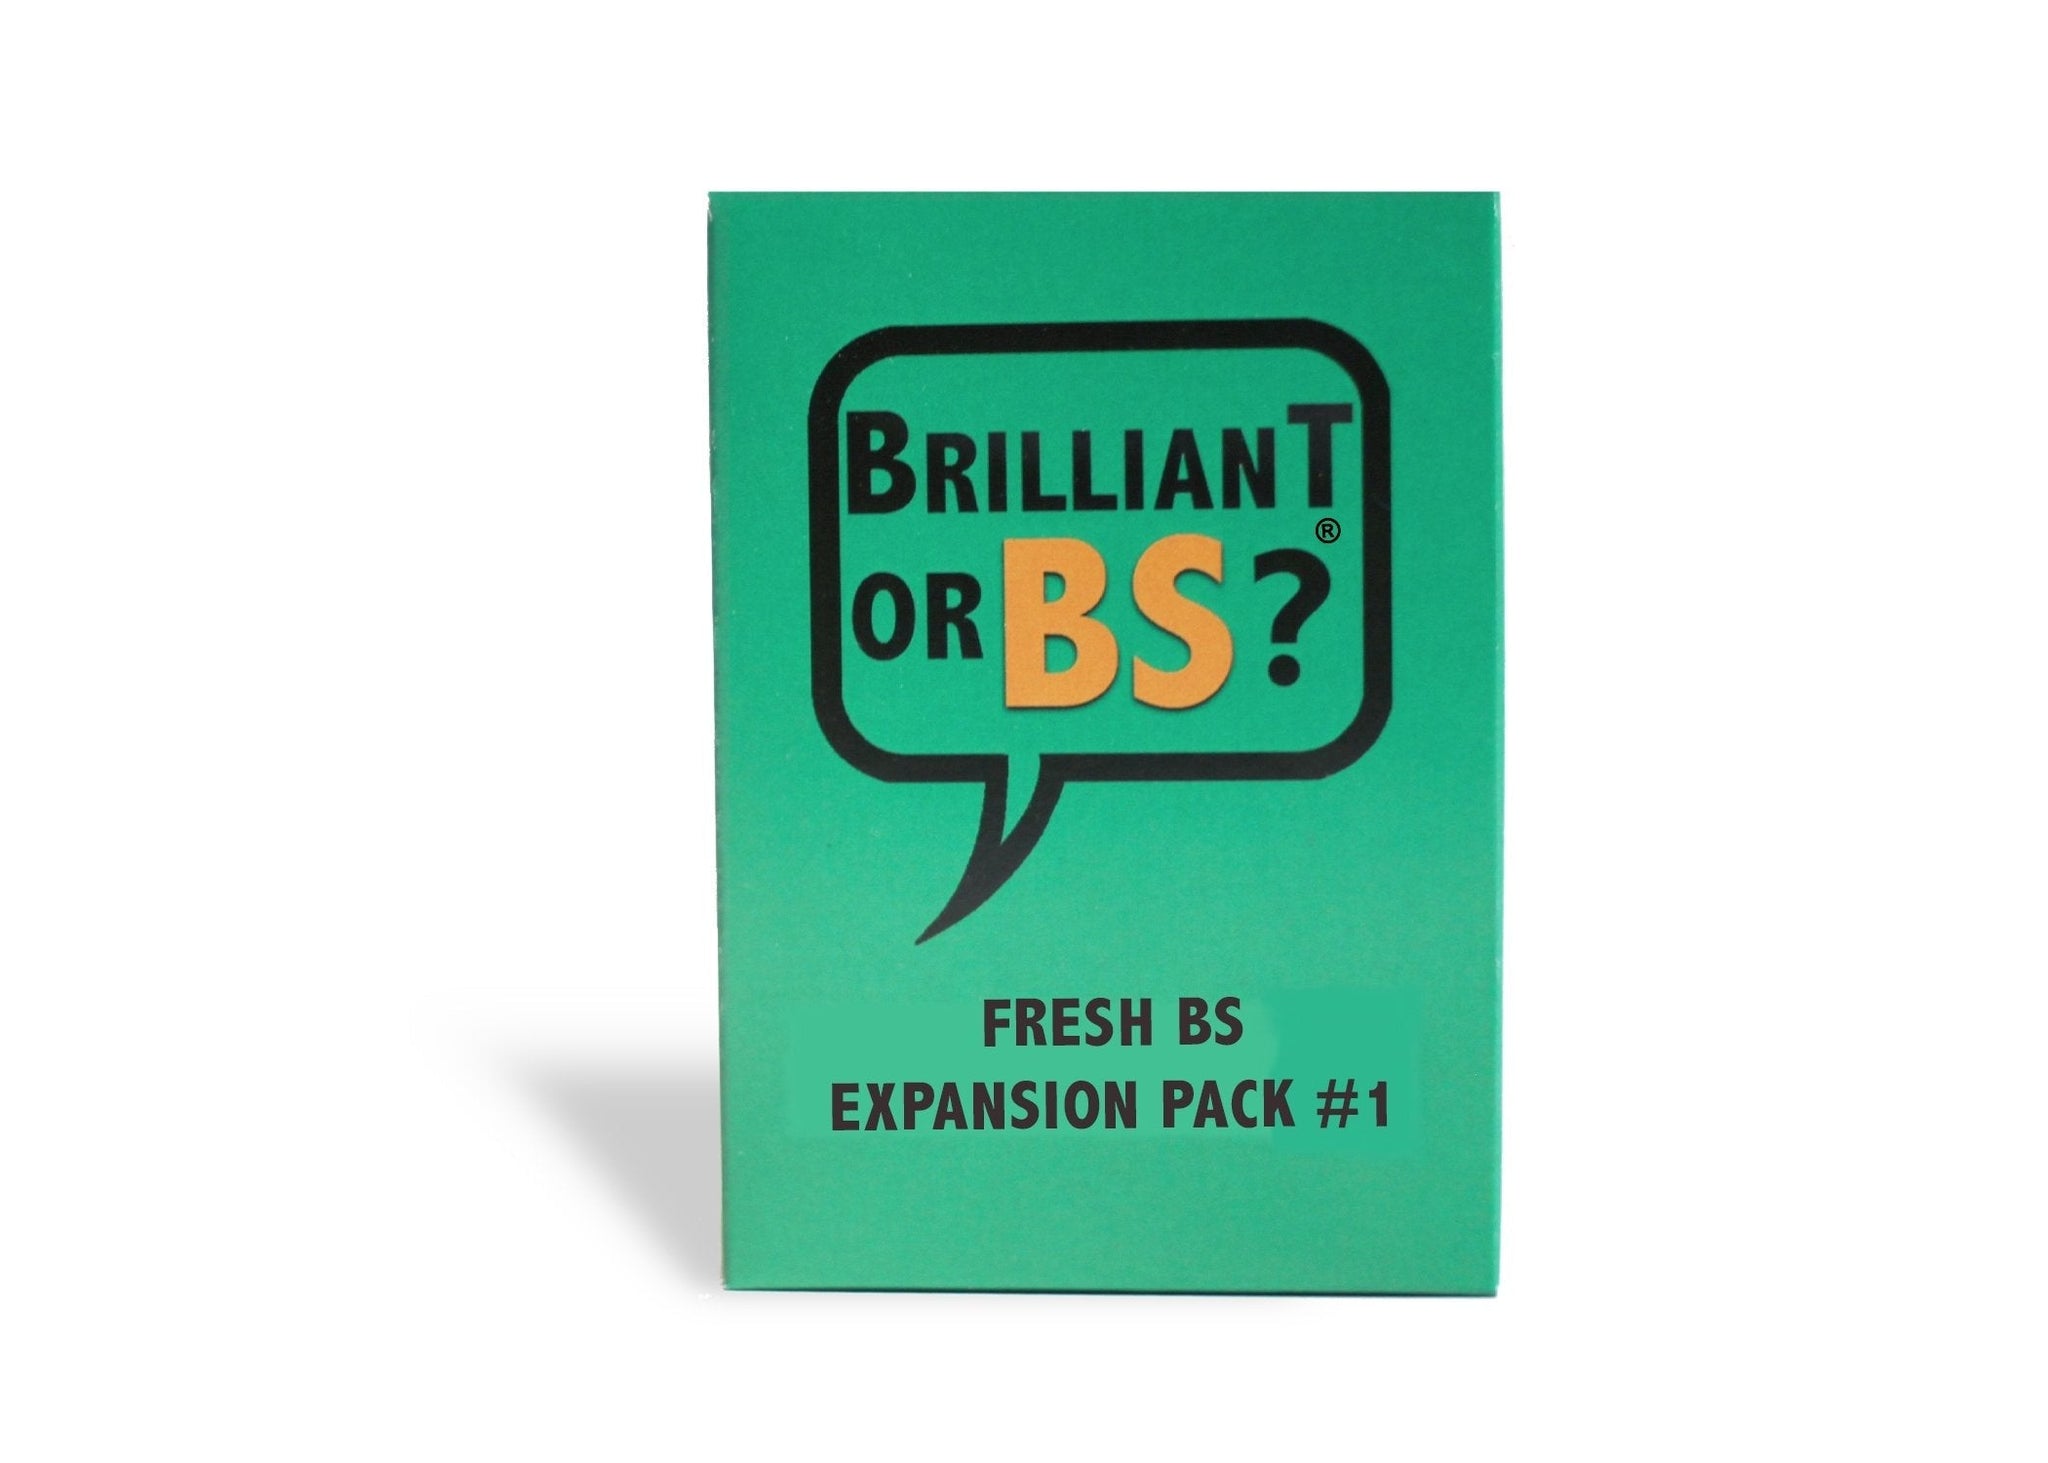 WHOLESALE - Brilliant or BS? Fresh BS Expansion Pack #1 - Brilliant or BS?